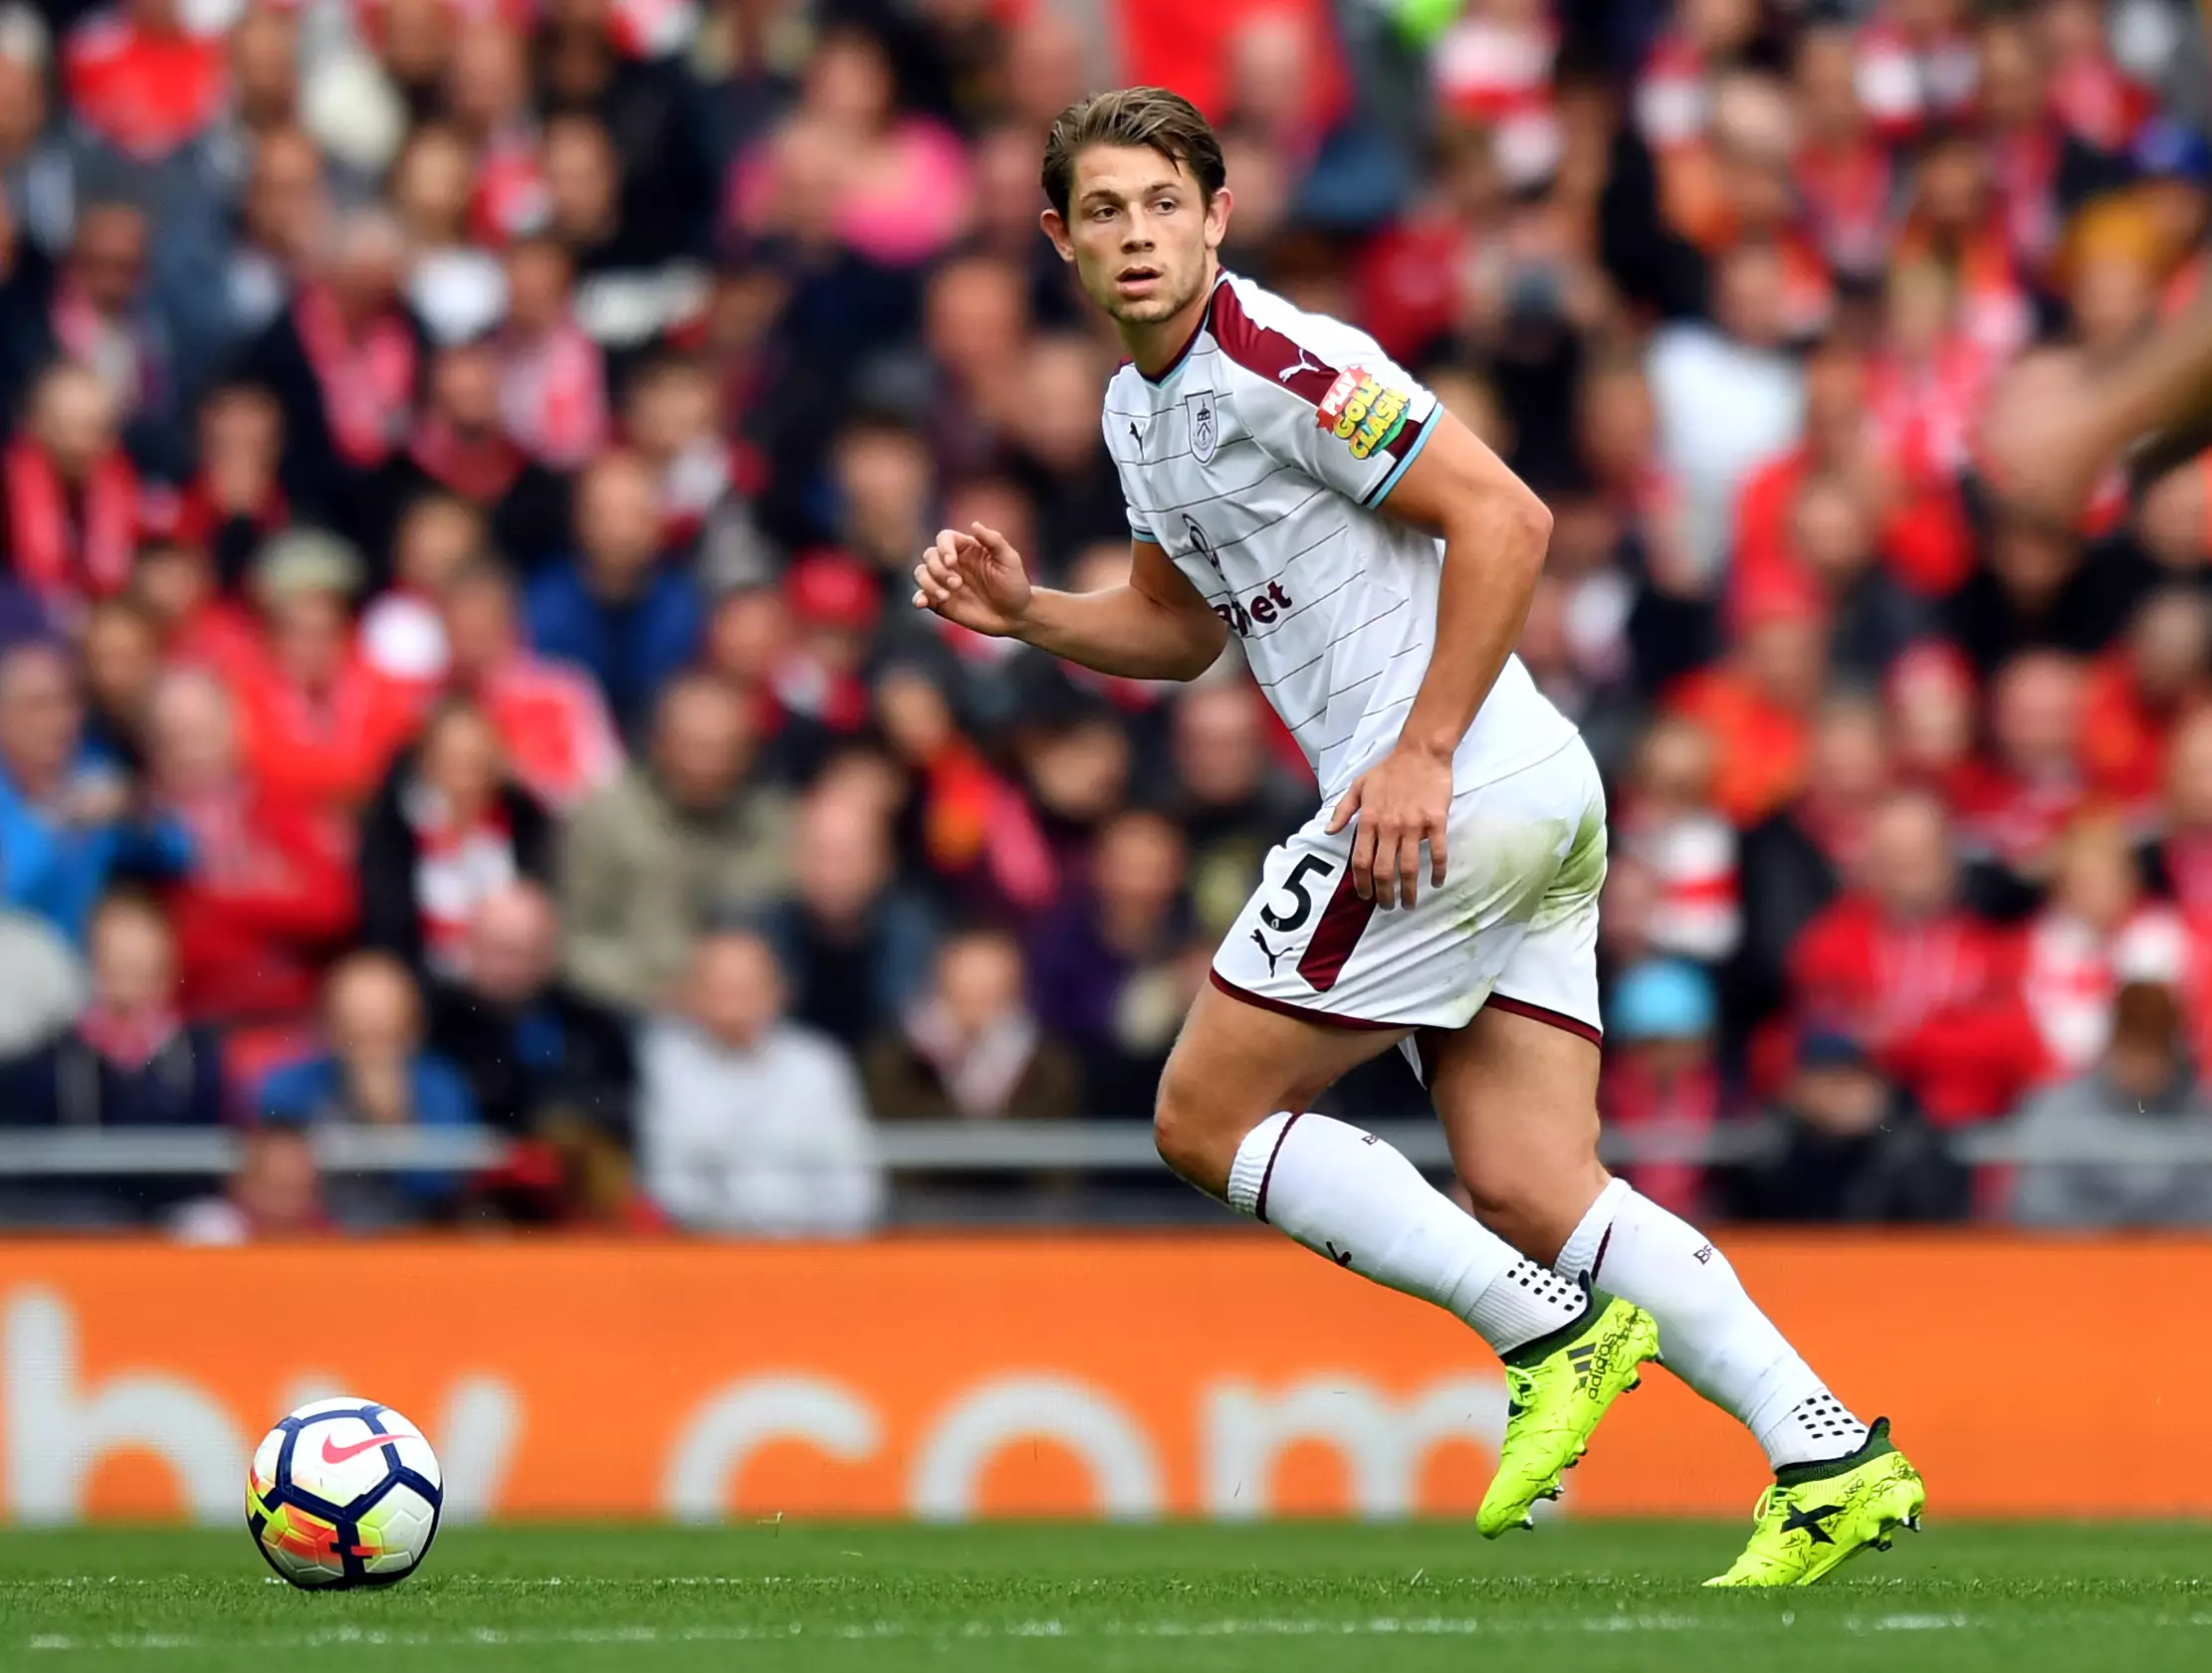 Tarkowski has been in excellent form this season. Image: PA Images.